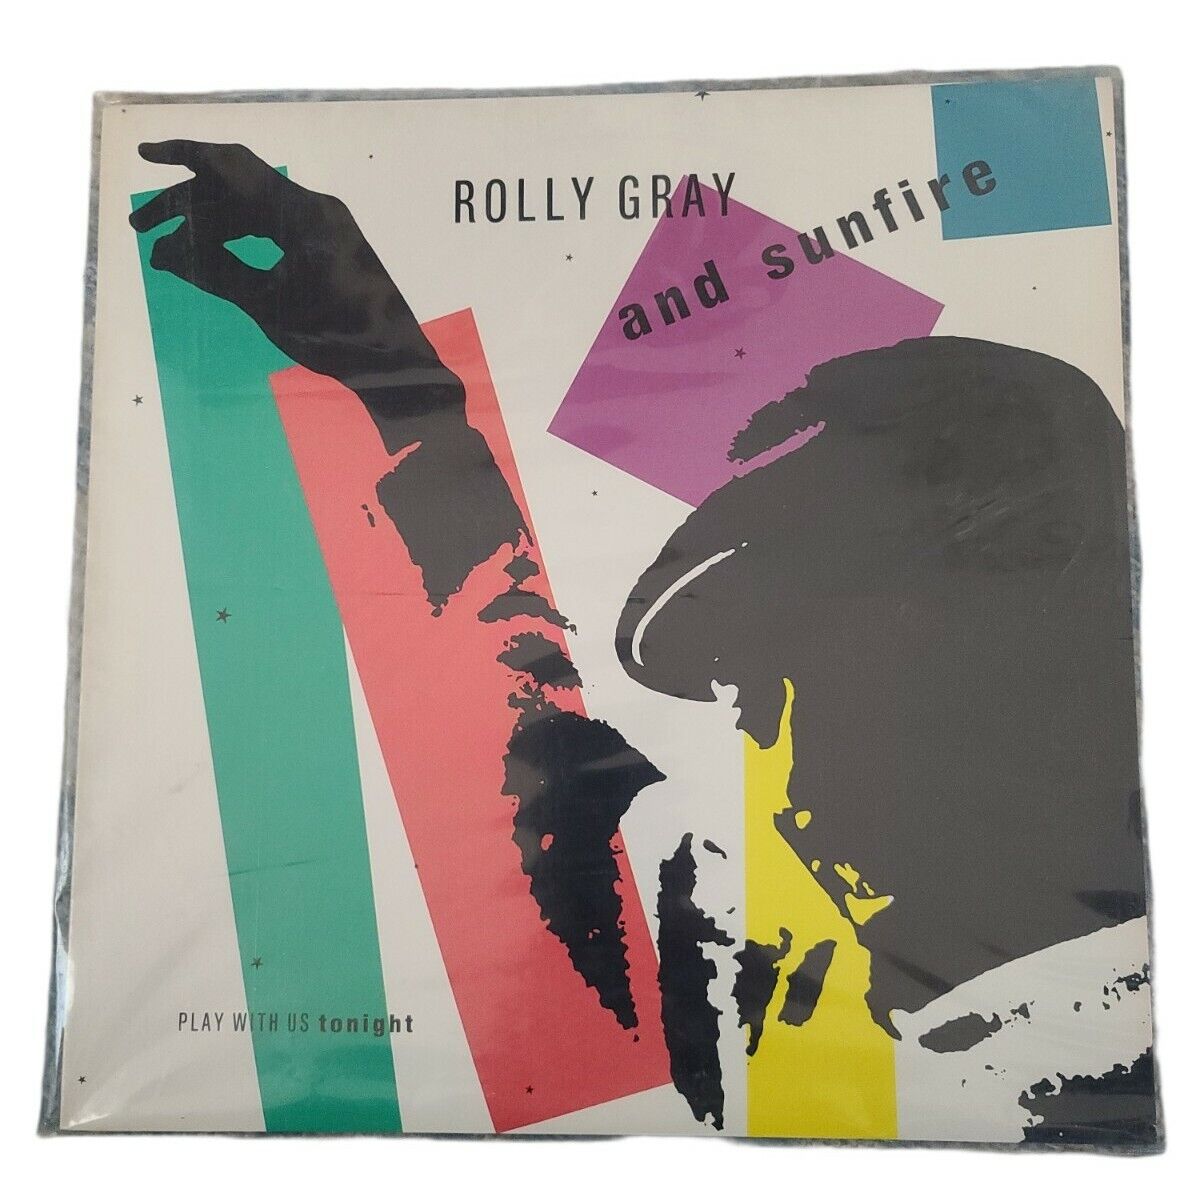 Rolly Gray and Sunfire-play with us tonight (Vinyl LP - 1983-US-Original)